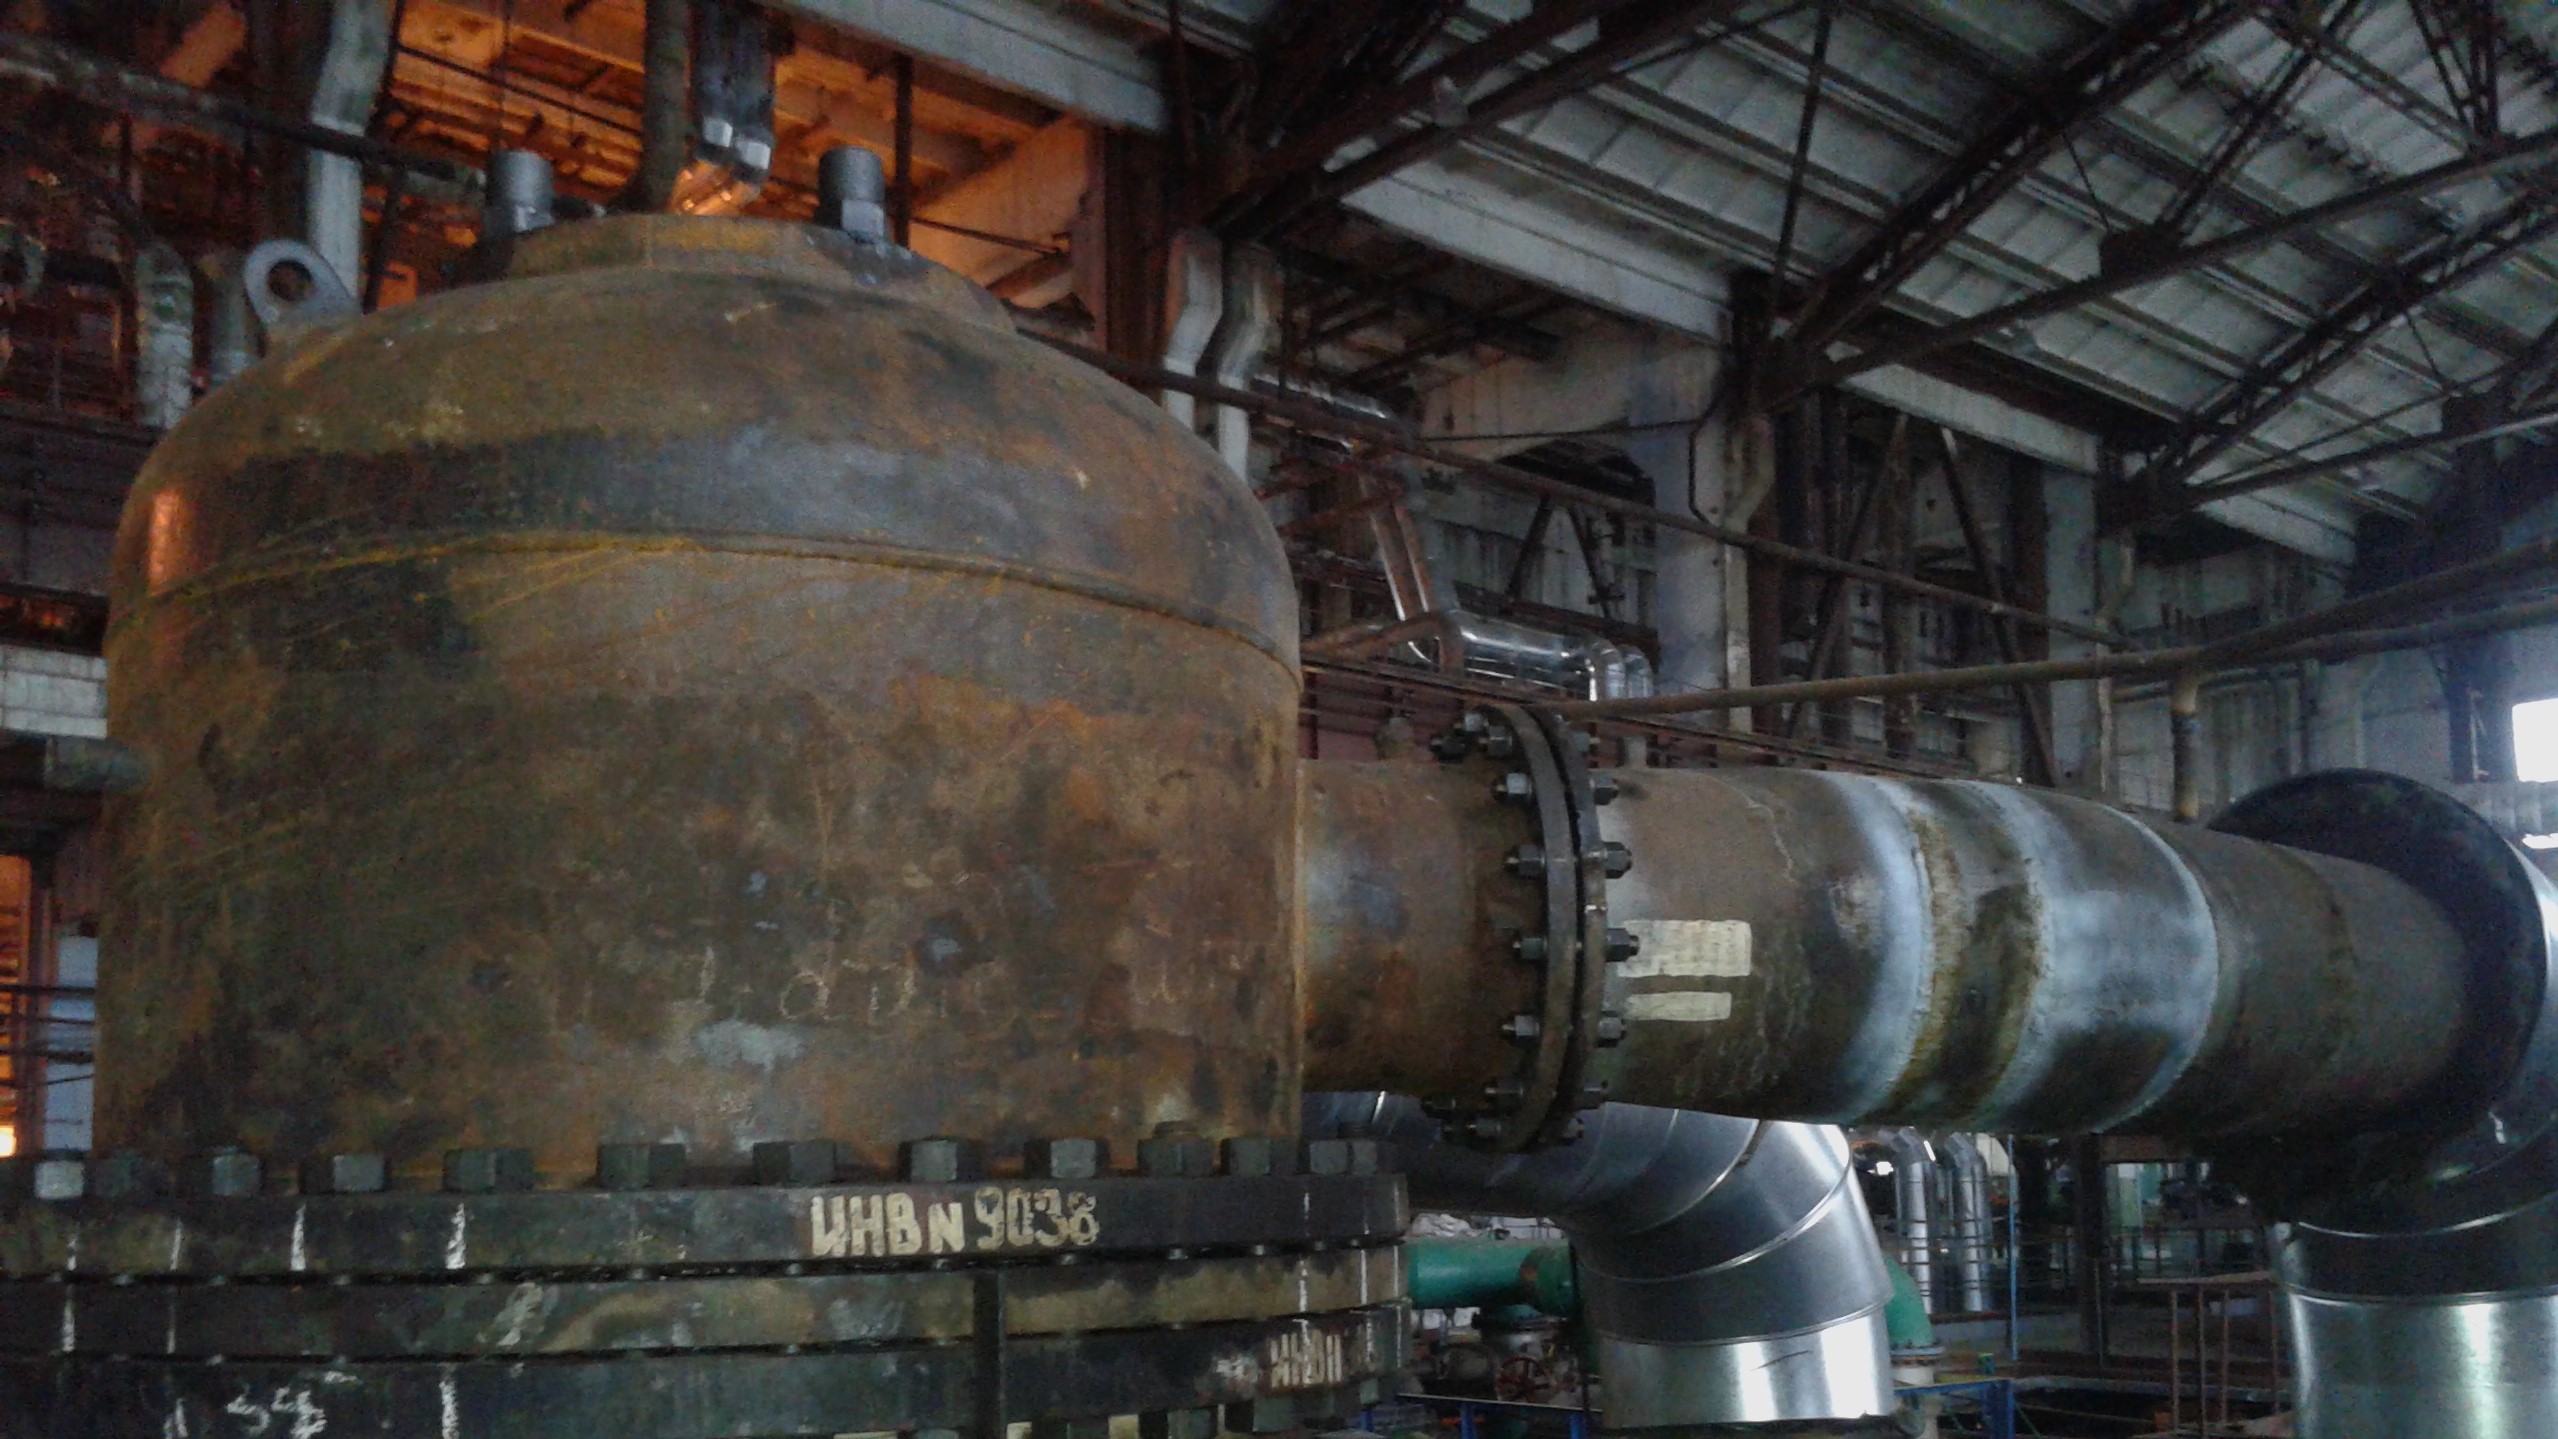 Superheater for steam фото 41